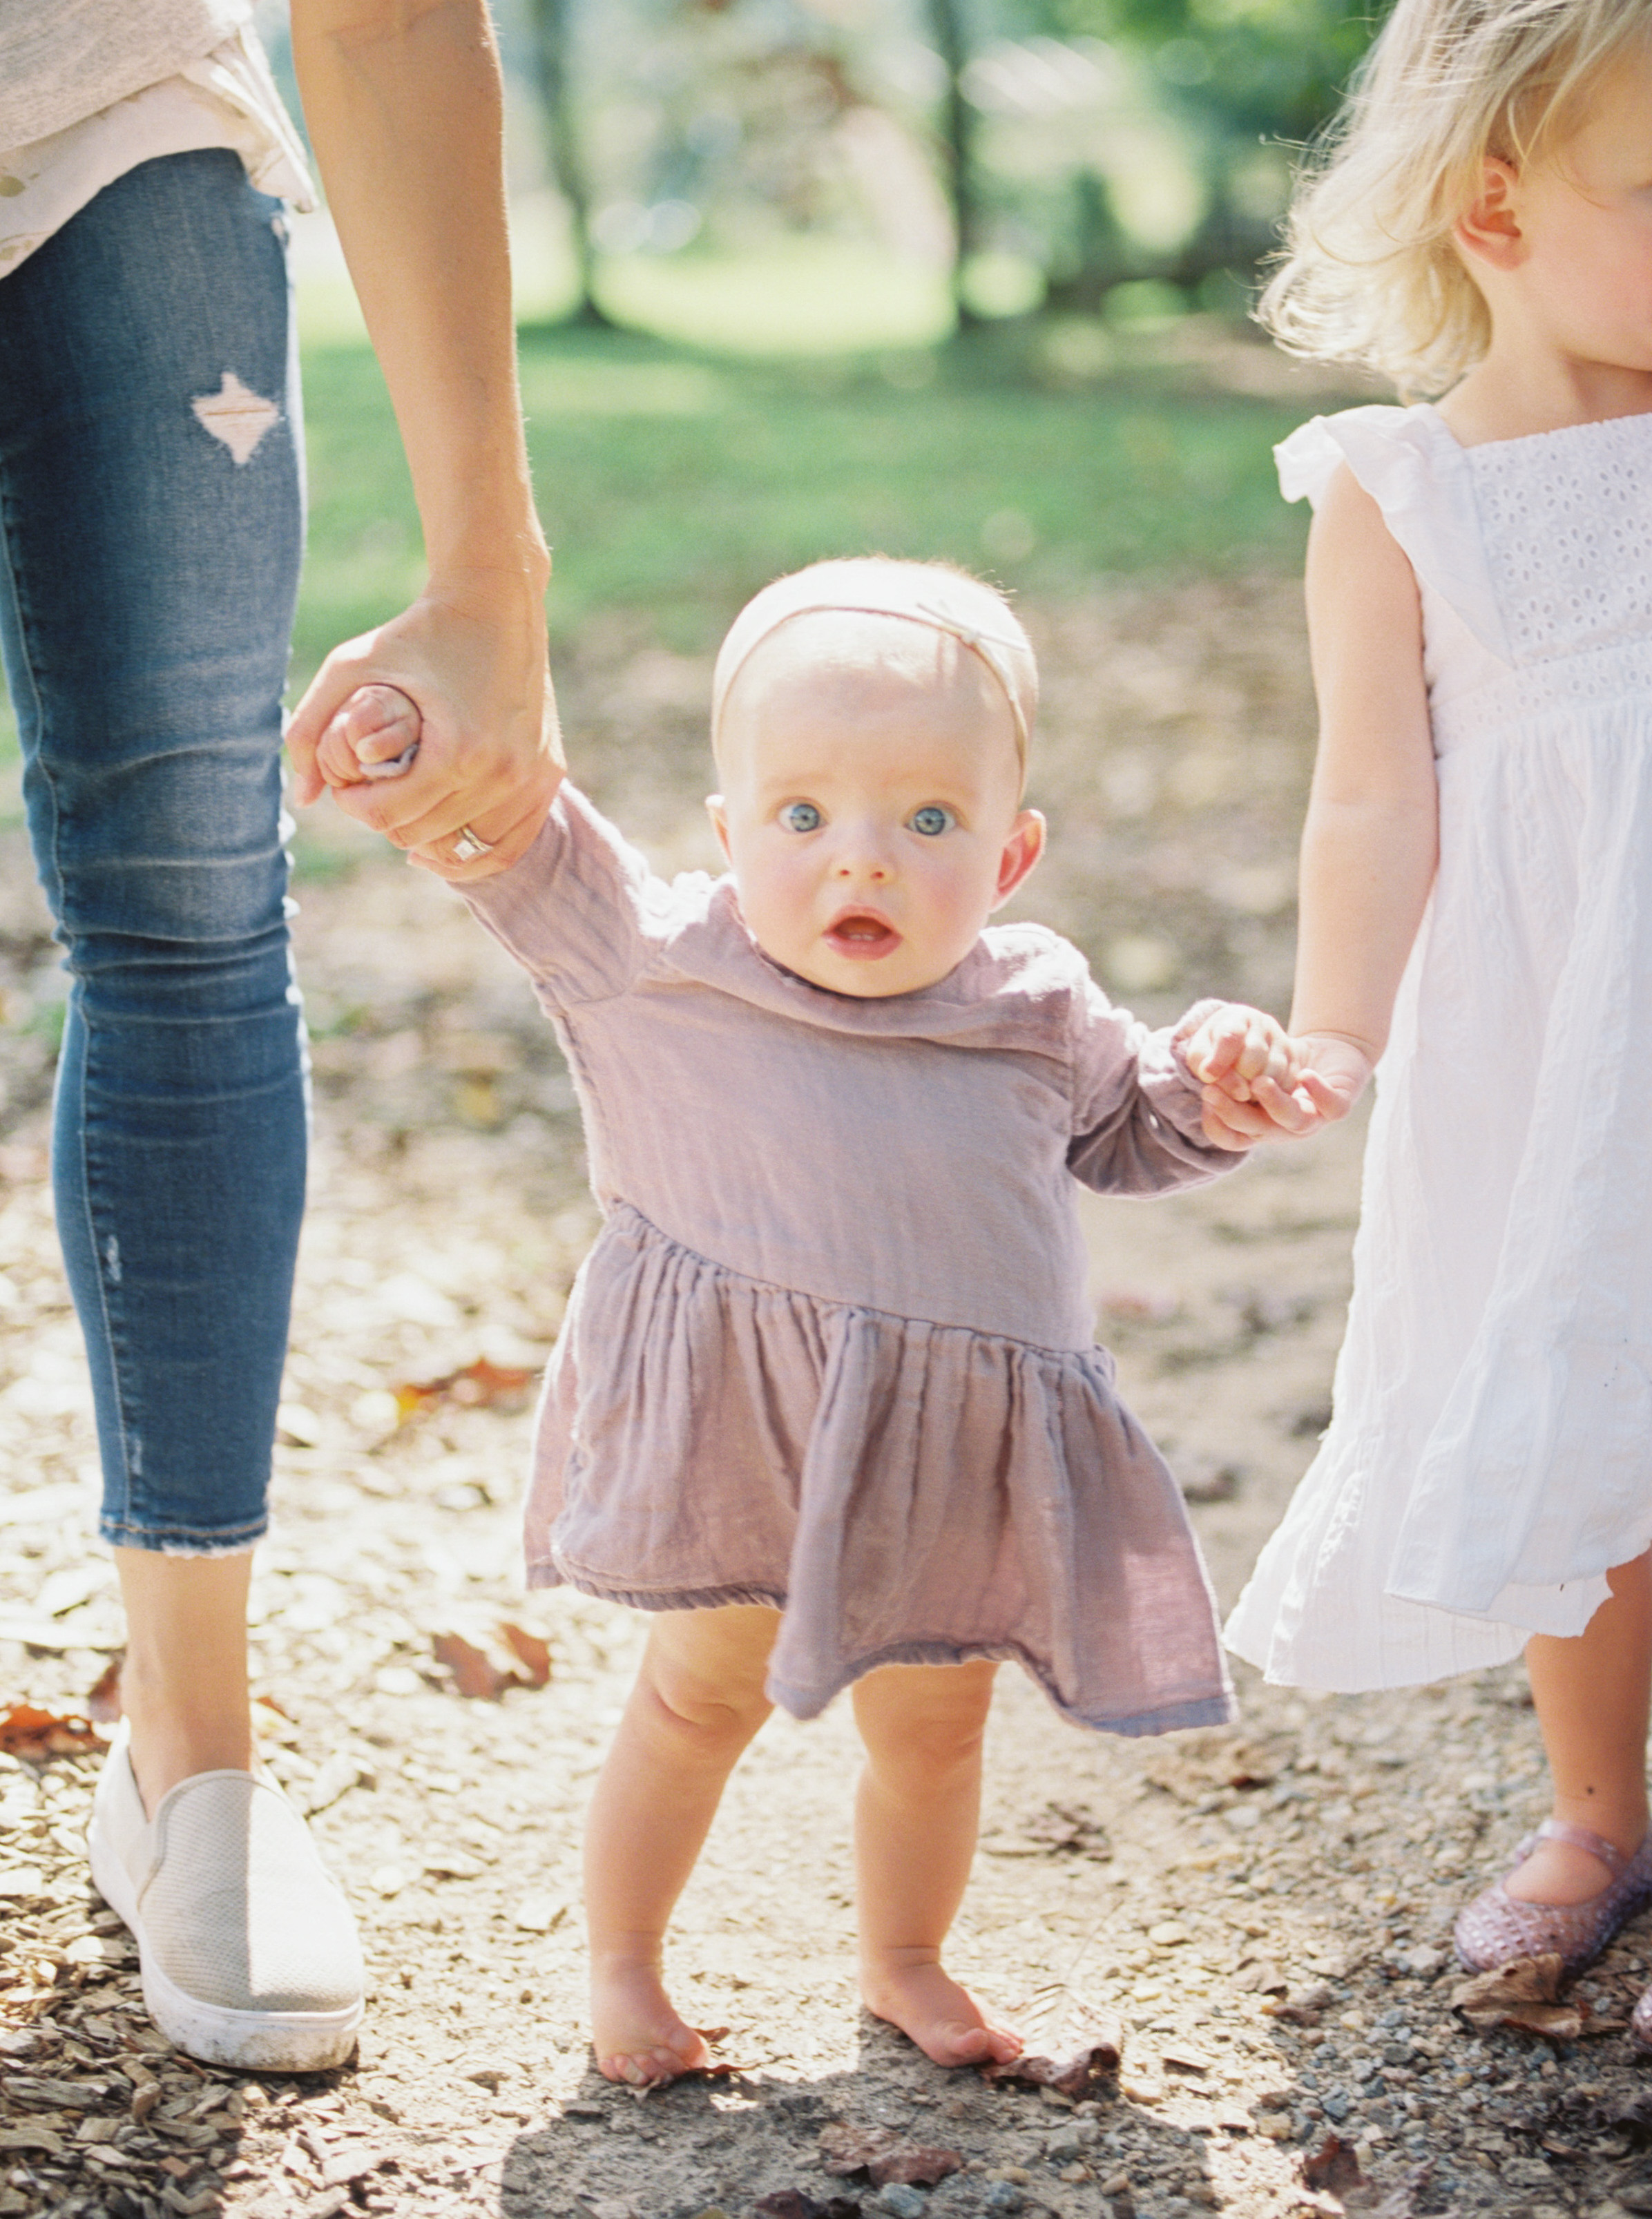 Mom friends are sometimes a bit hard to come by. Motherhood and Lifestyle blogger Meghan Basinger shares the top 6 things to avoid if you want mom friends. 